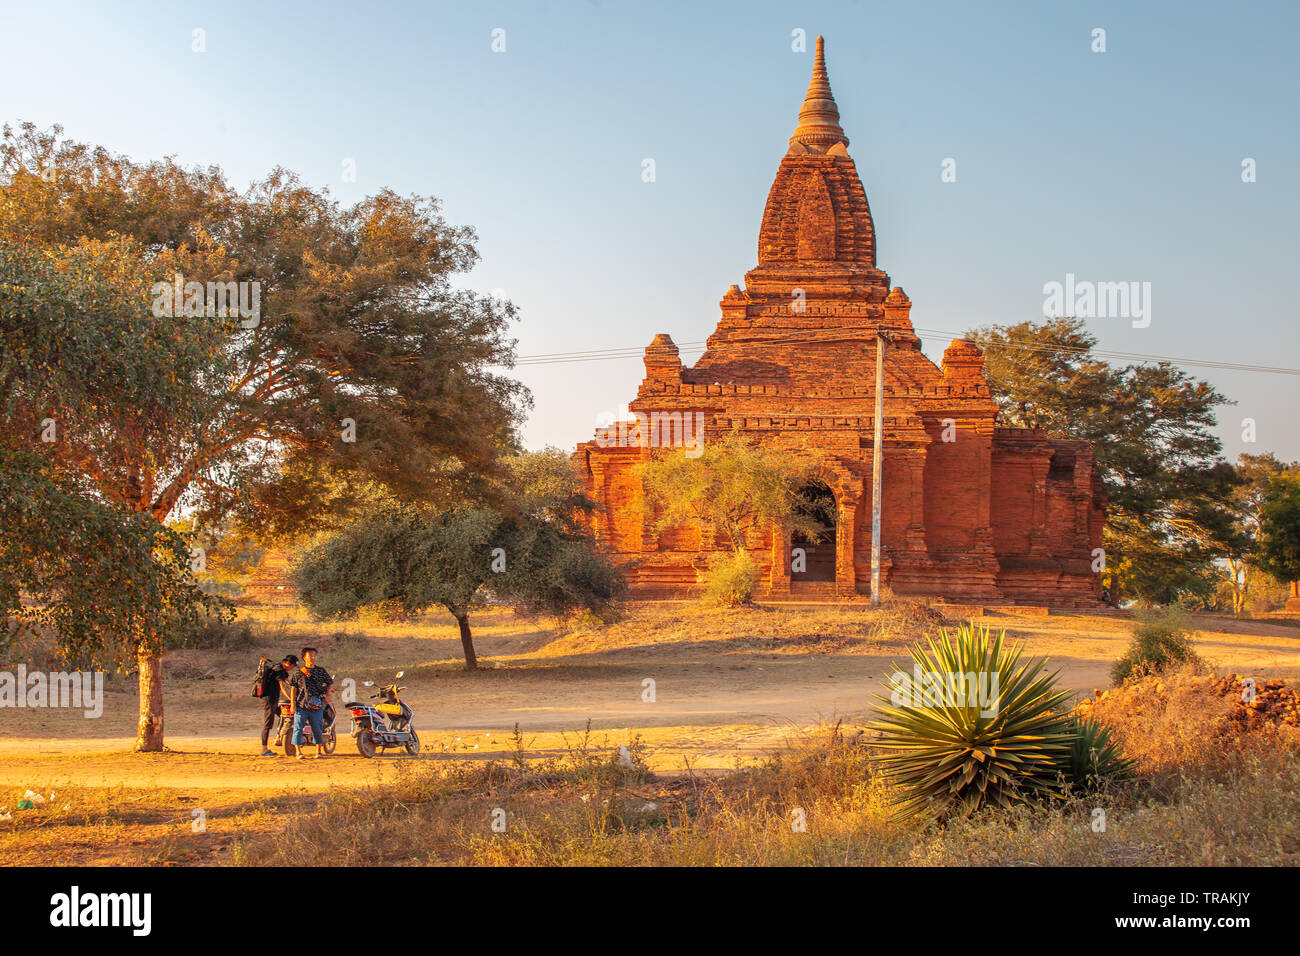 A temple in the area of Bagan Stock Photo